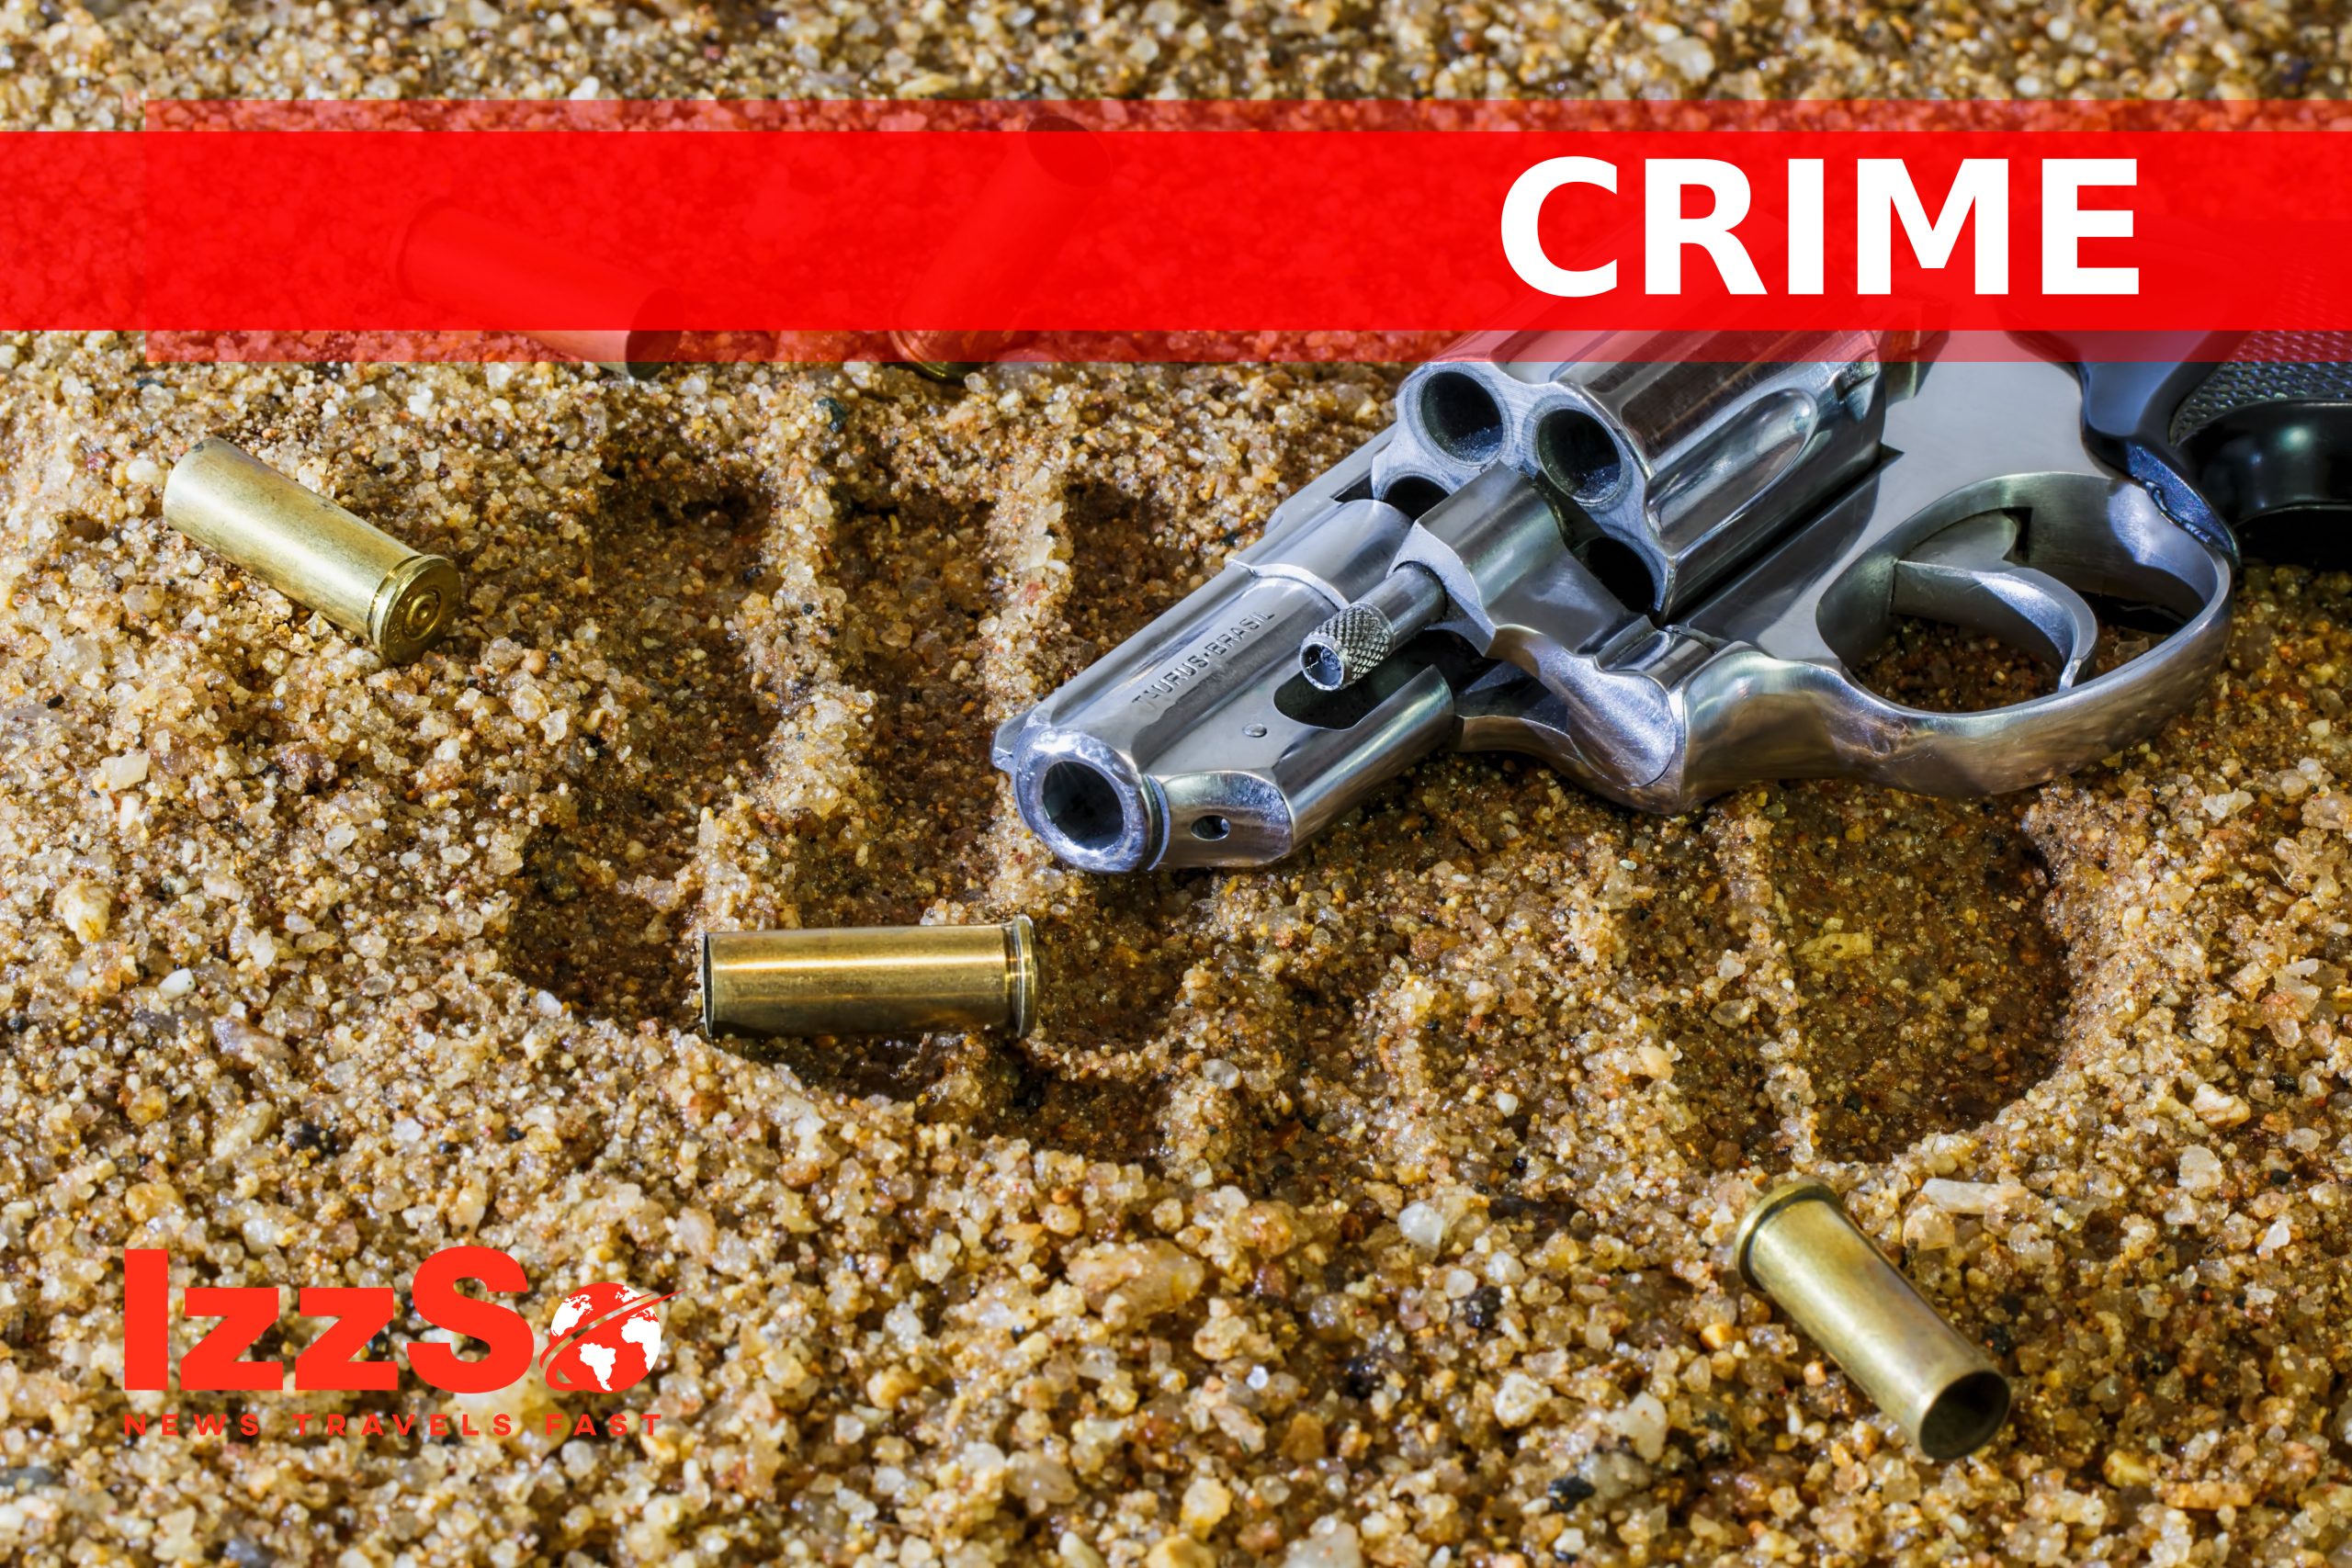 One man wounded, 3 arrested following police involved shooting in Laventille